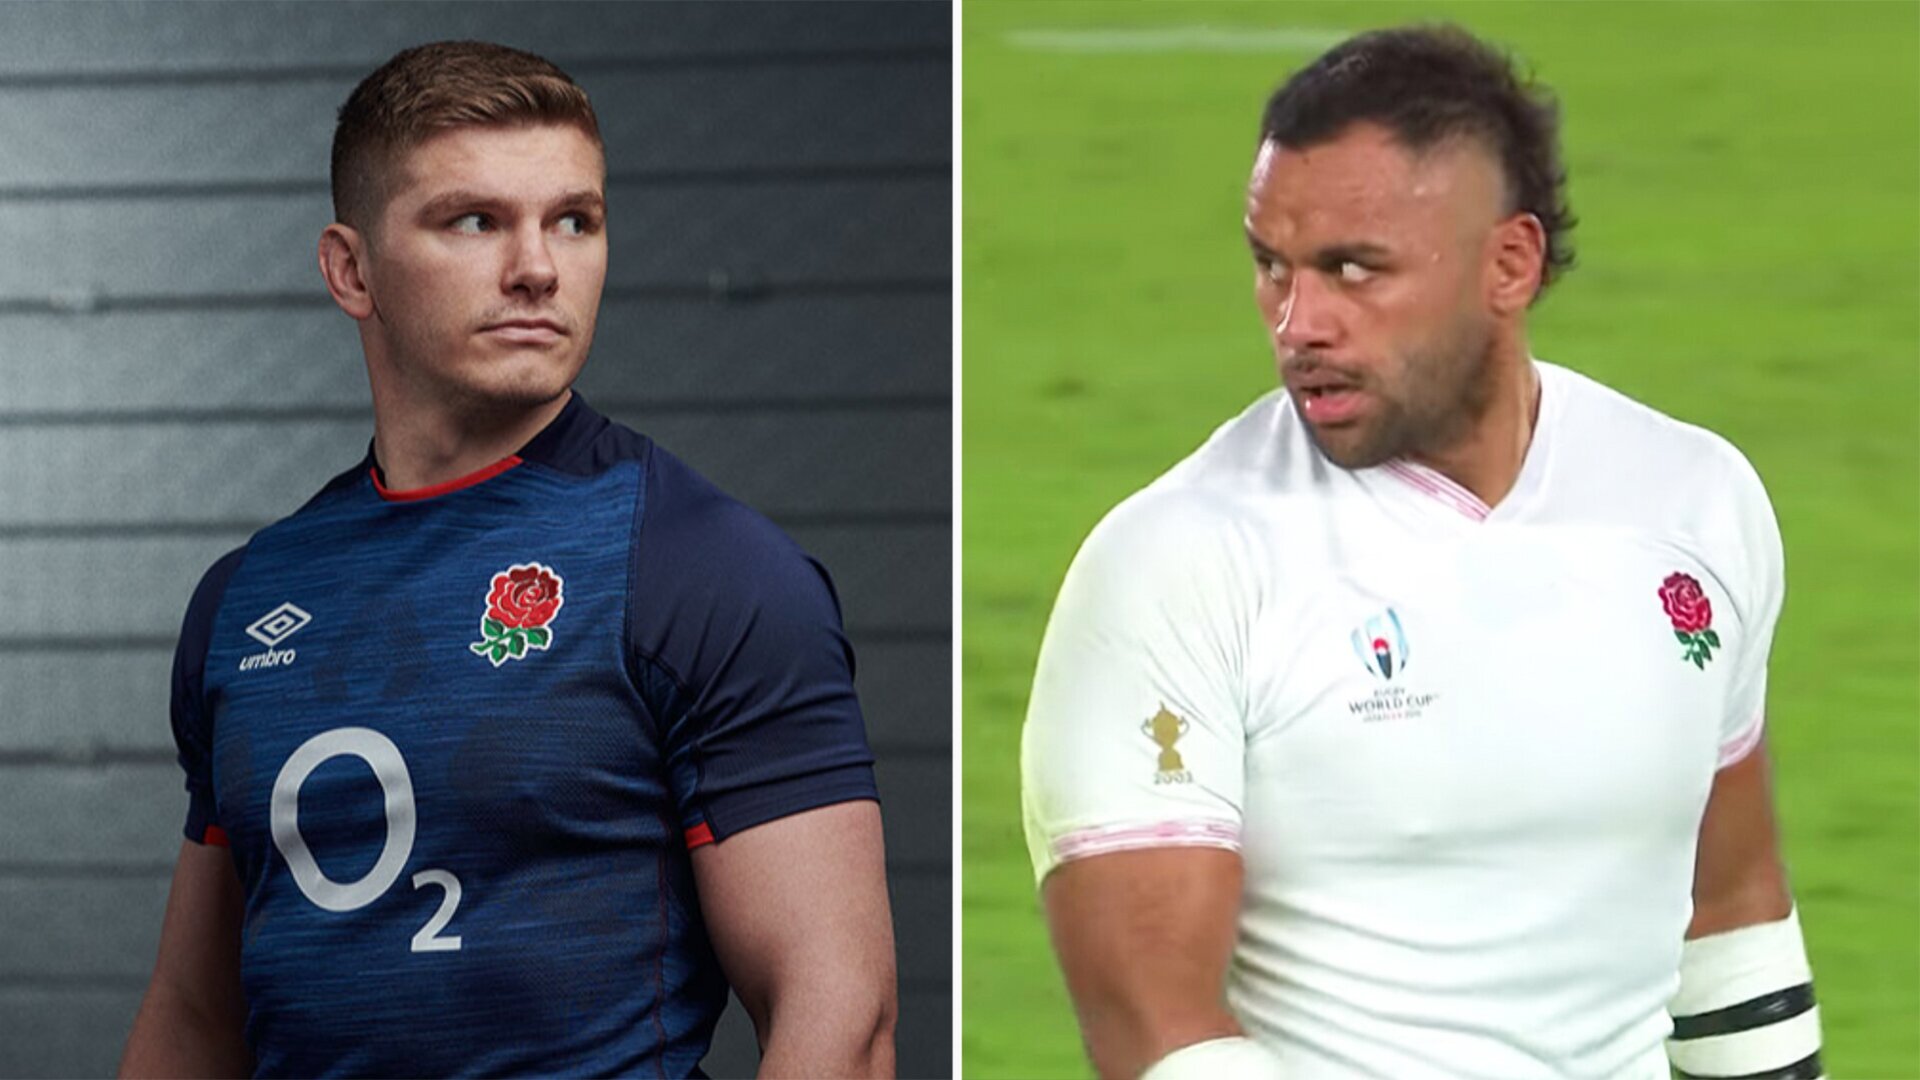 Rugby stars react to Umbro's controversial new England kit